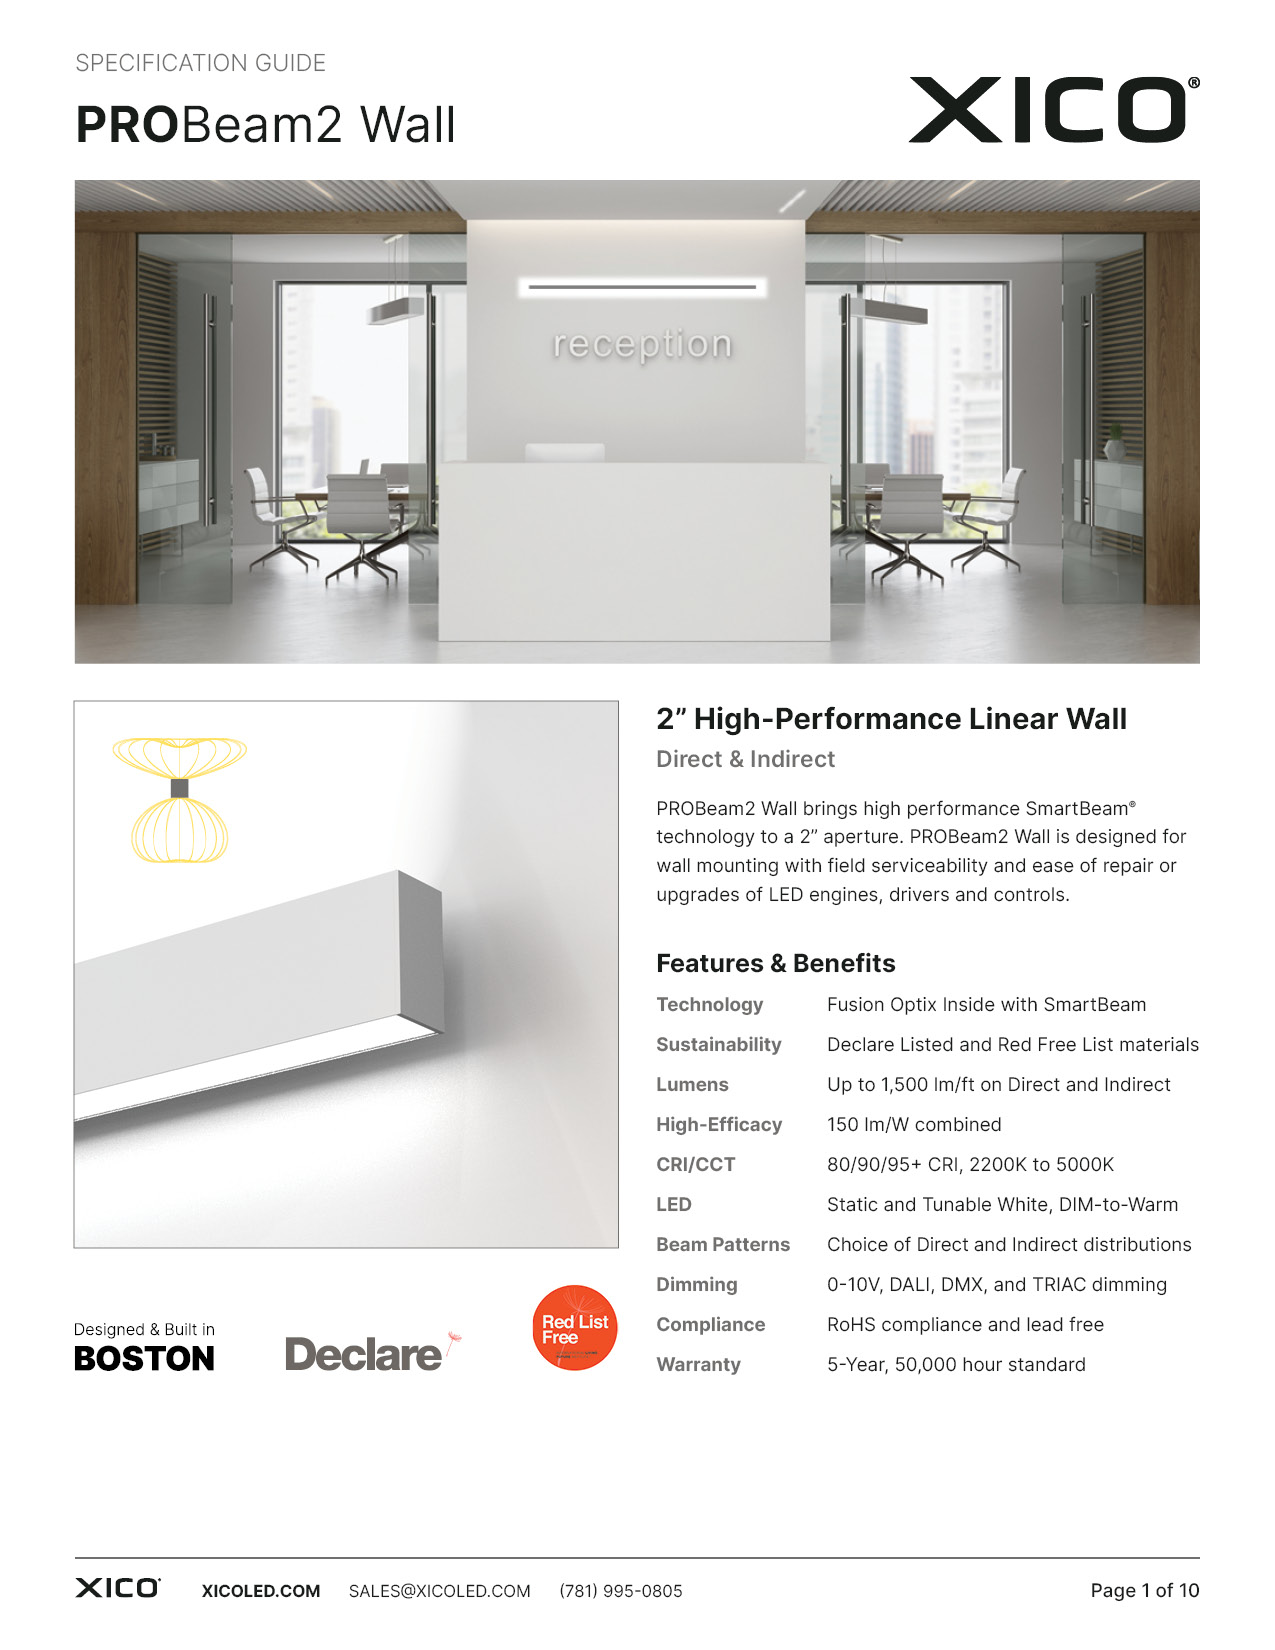 PROBeam2 Wall Specification Guide